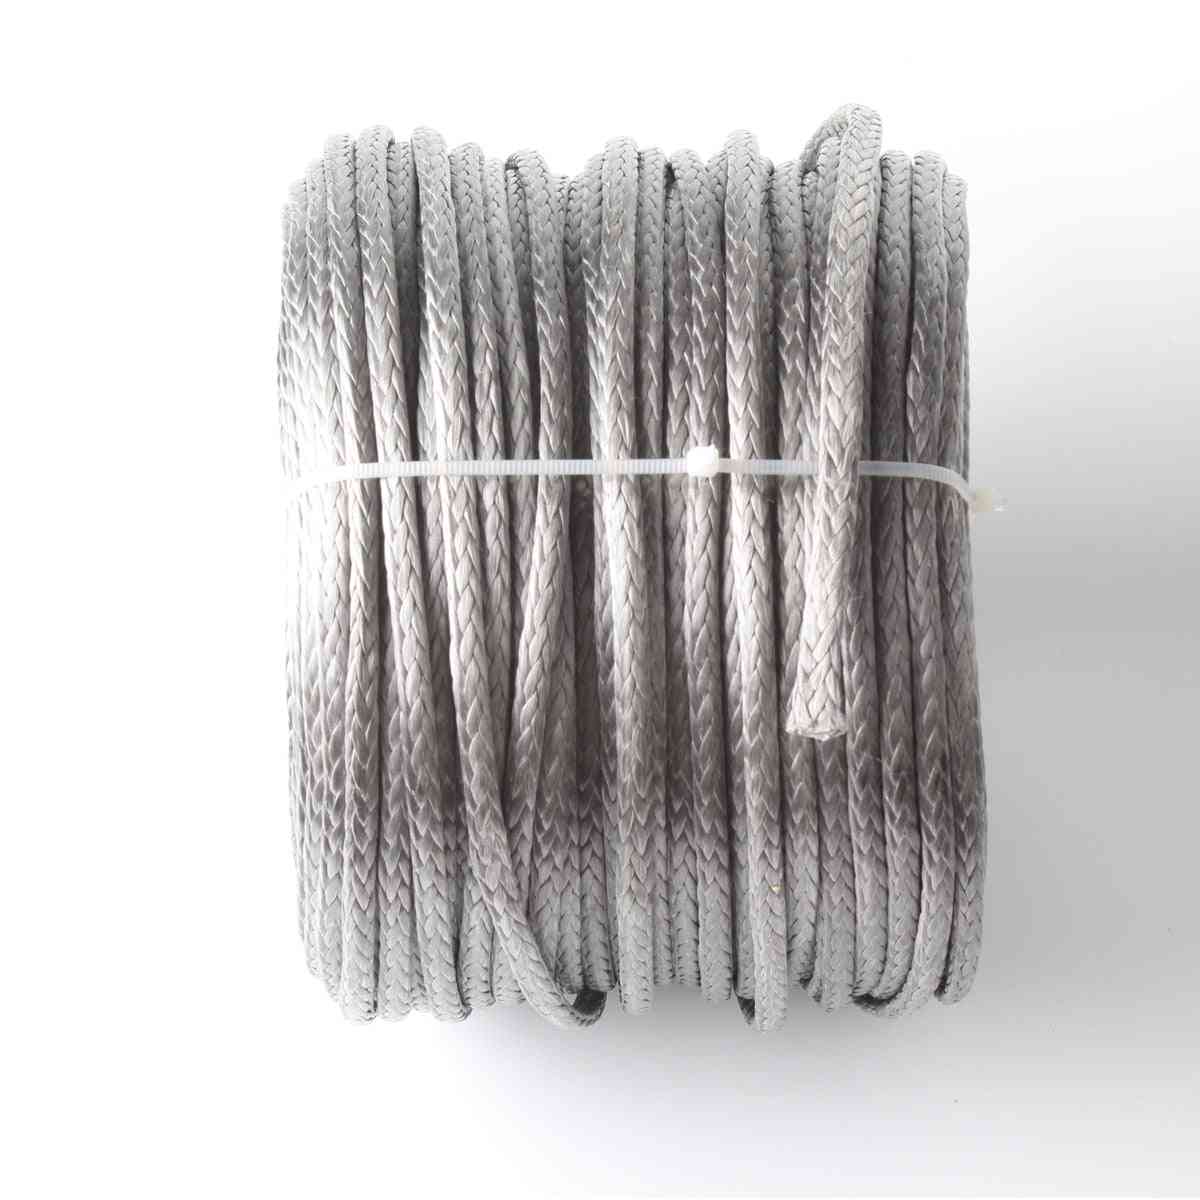 Jeely Weaves Paraglider Winch Braided Rope